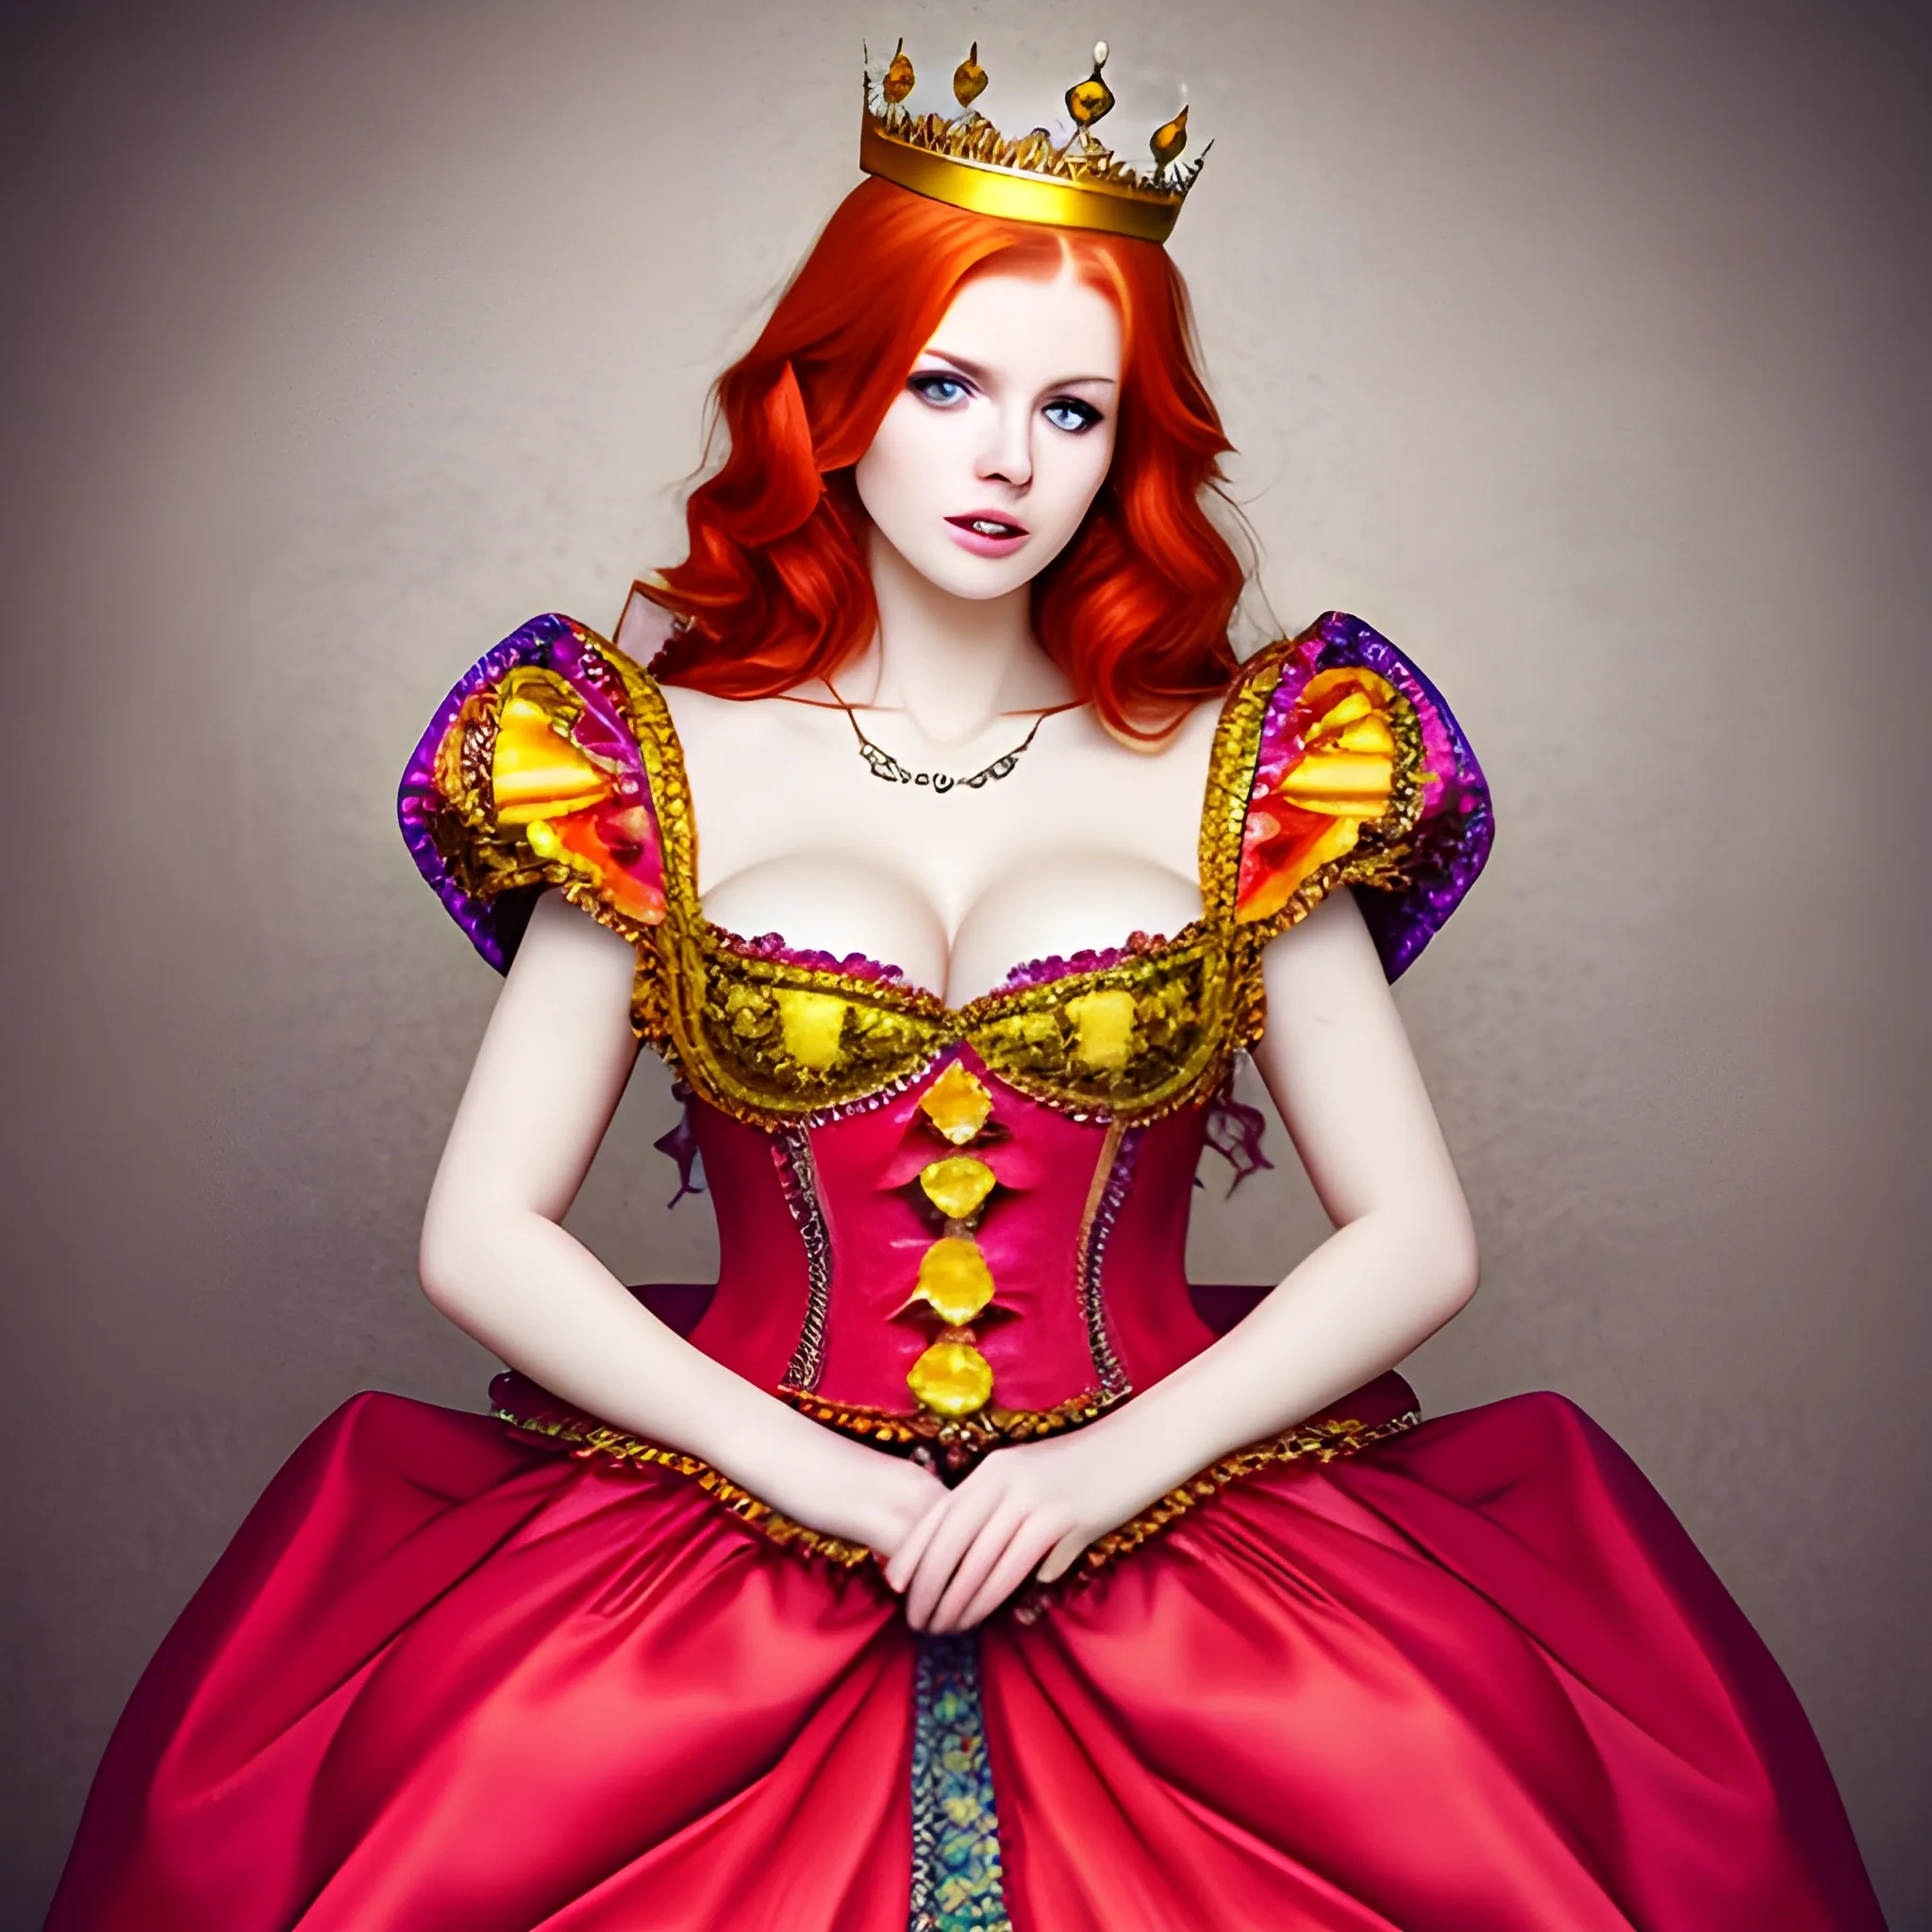 Beautiful redhead European woman with crown and colorful outfits, premium photography, ultra high definition, sexy 